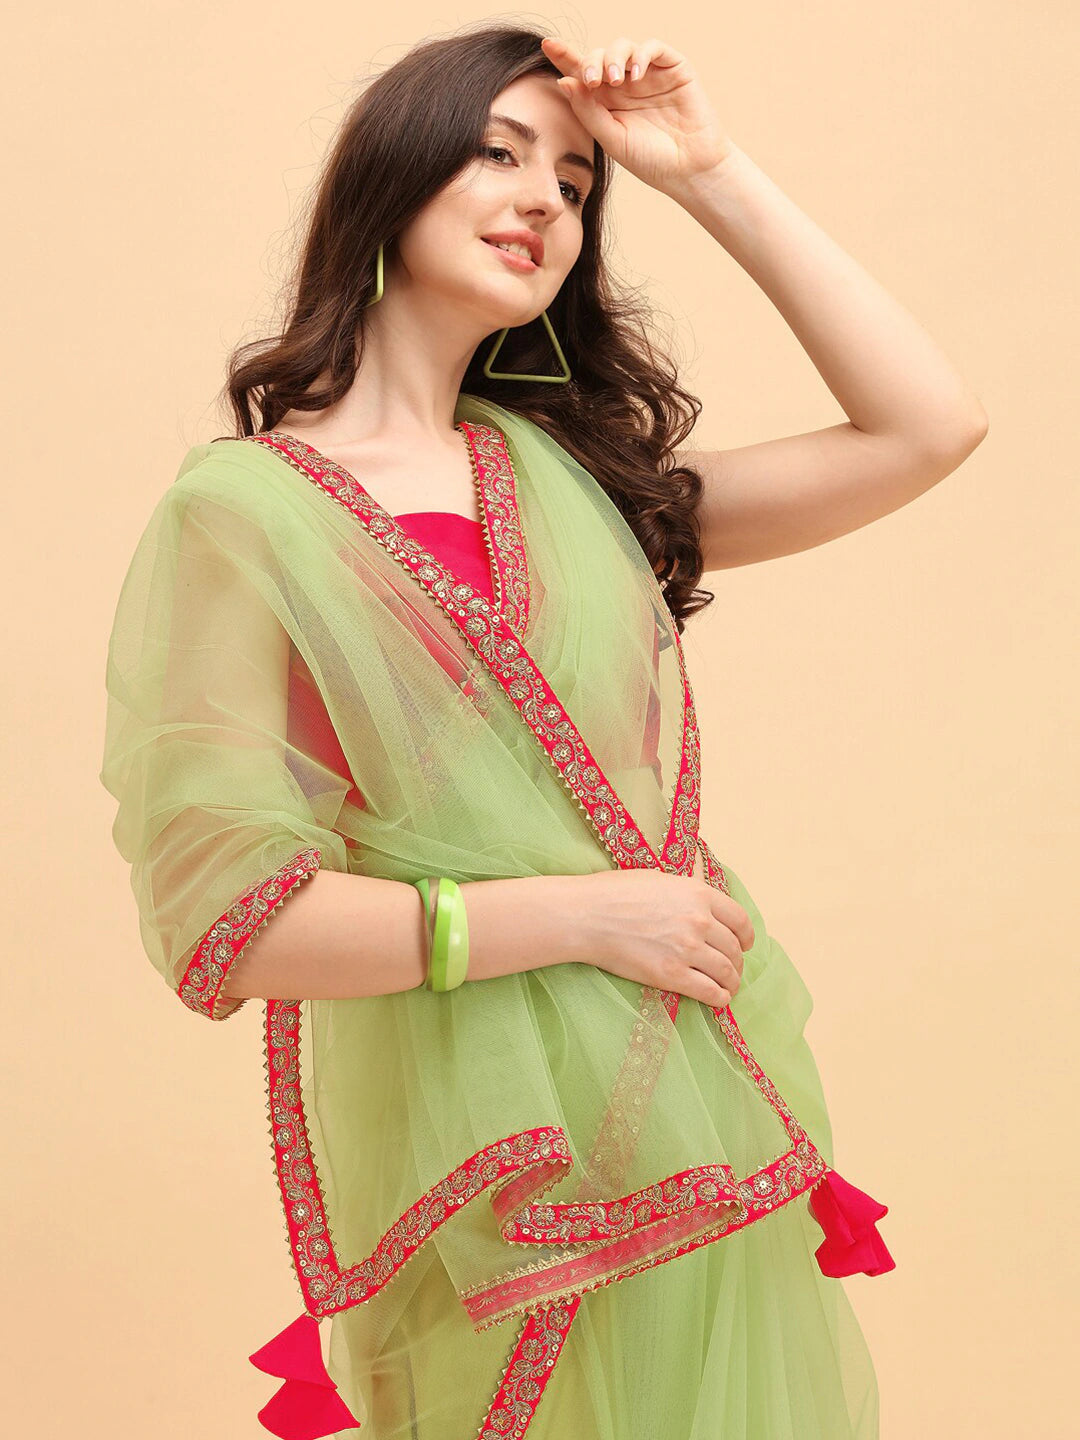 Green & Red Net Saree Indian Clothing in Denver, CO, Aurora, CO, Boulder, CO, Fort Collins, CO, Colorado Springs, CO, Parker, CO, Highlands Ranch, CO, Cherry Creek, CO, Centennial, CO, and Longmont, CO. NATIONWIDE SHIPPING USA- India Fashion X